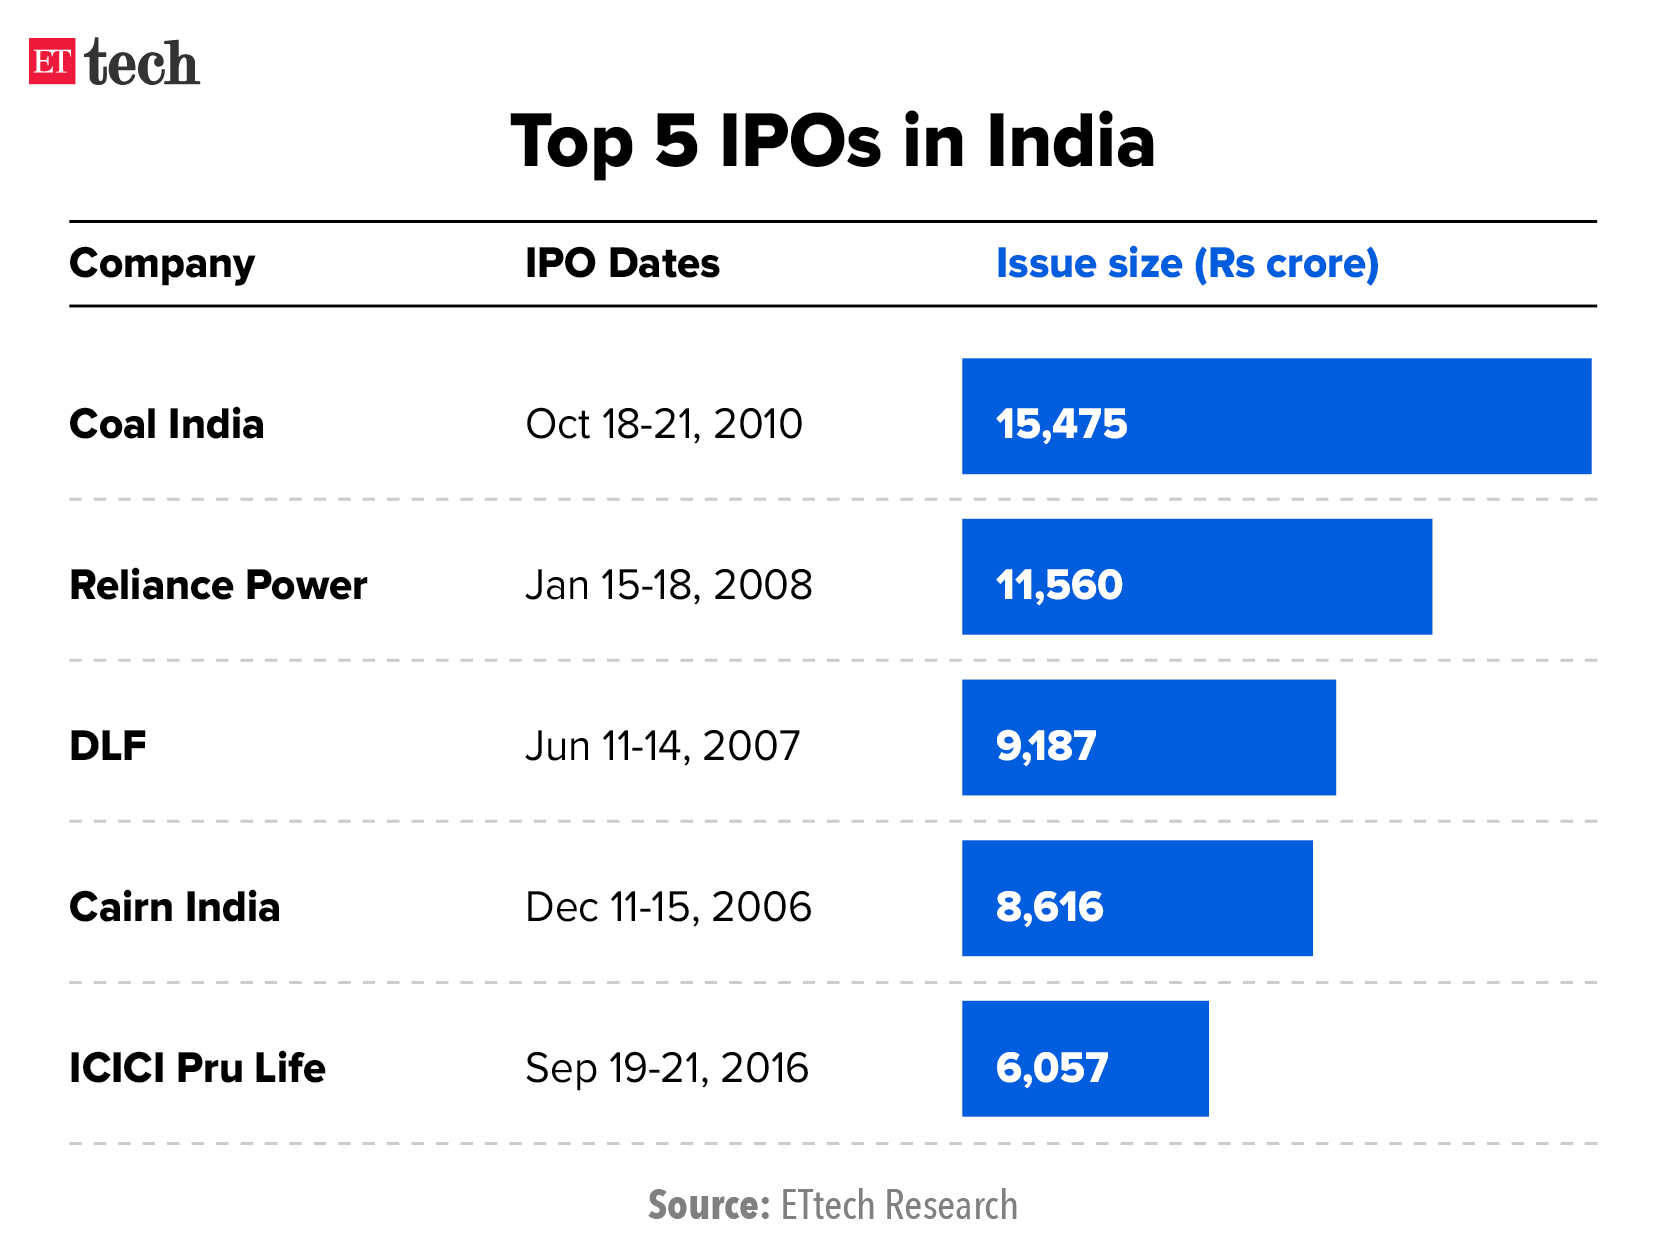 Top 5 IPOs